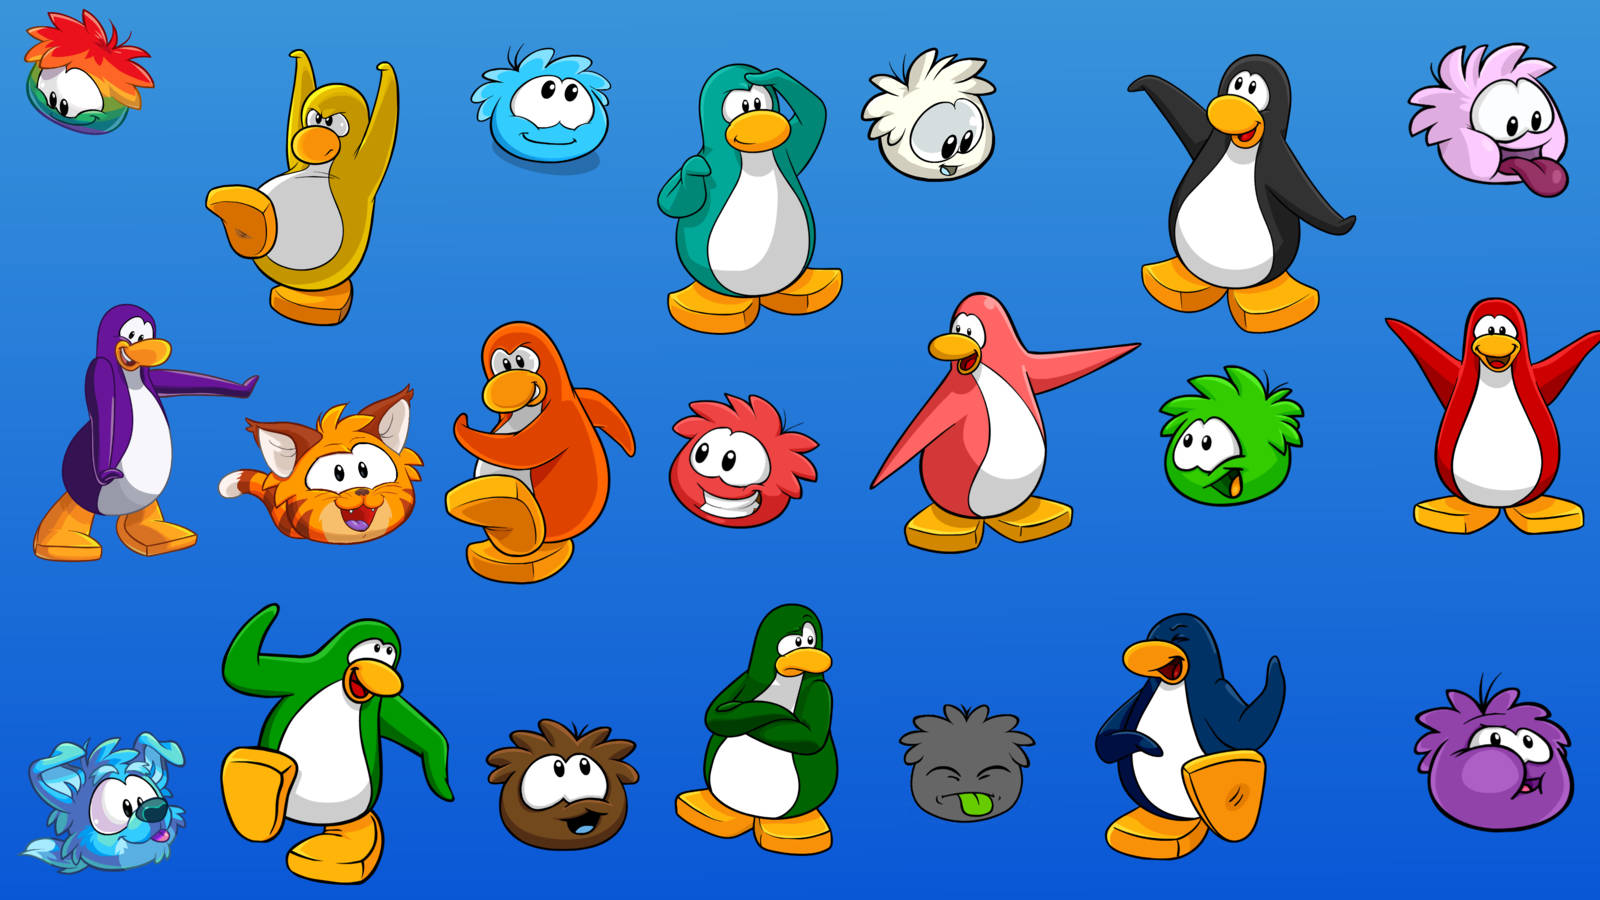 Magnificent Club Penguin Characters